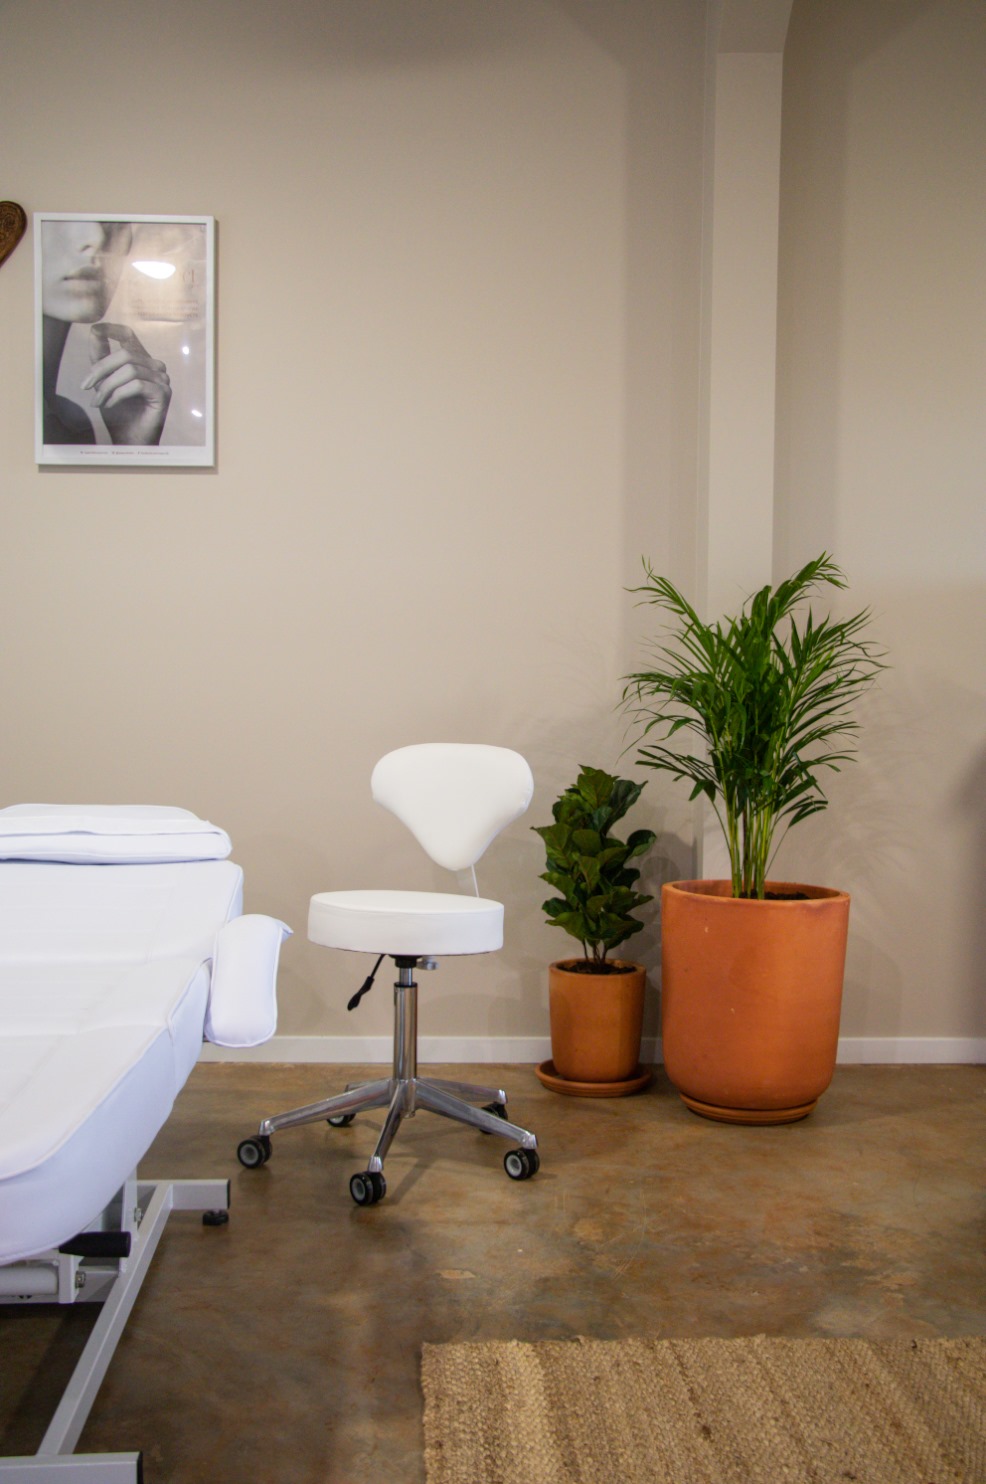 Clunes Cosmetic Clinic | health | 1 Flatley Dr, Clunes NSW 2480, Australia | 0413342235 OR +61 413 342 235